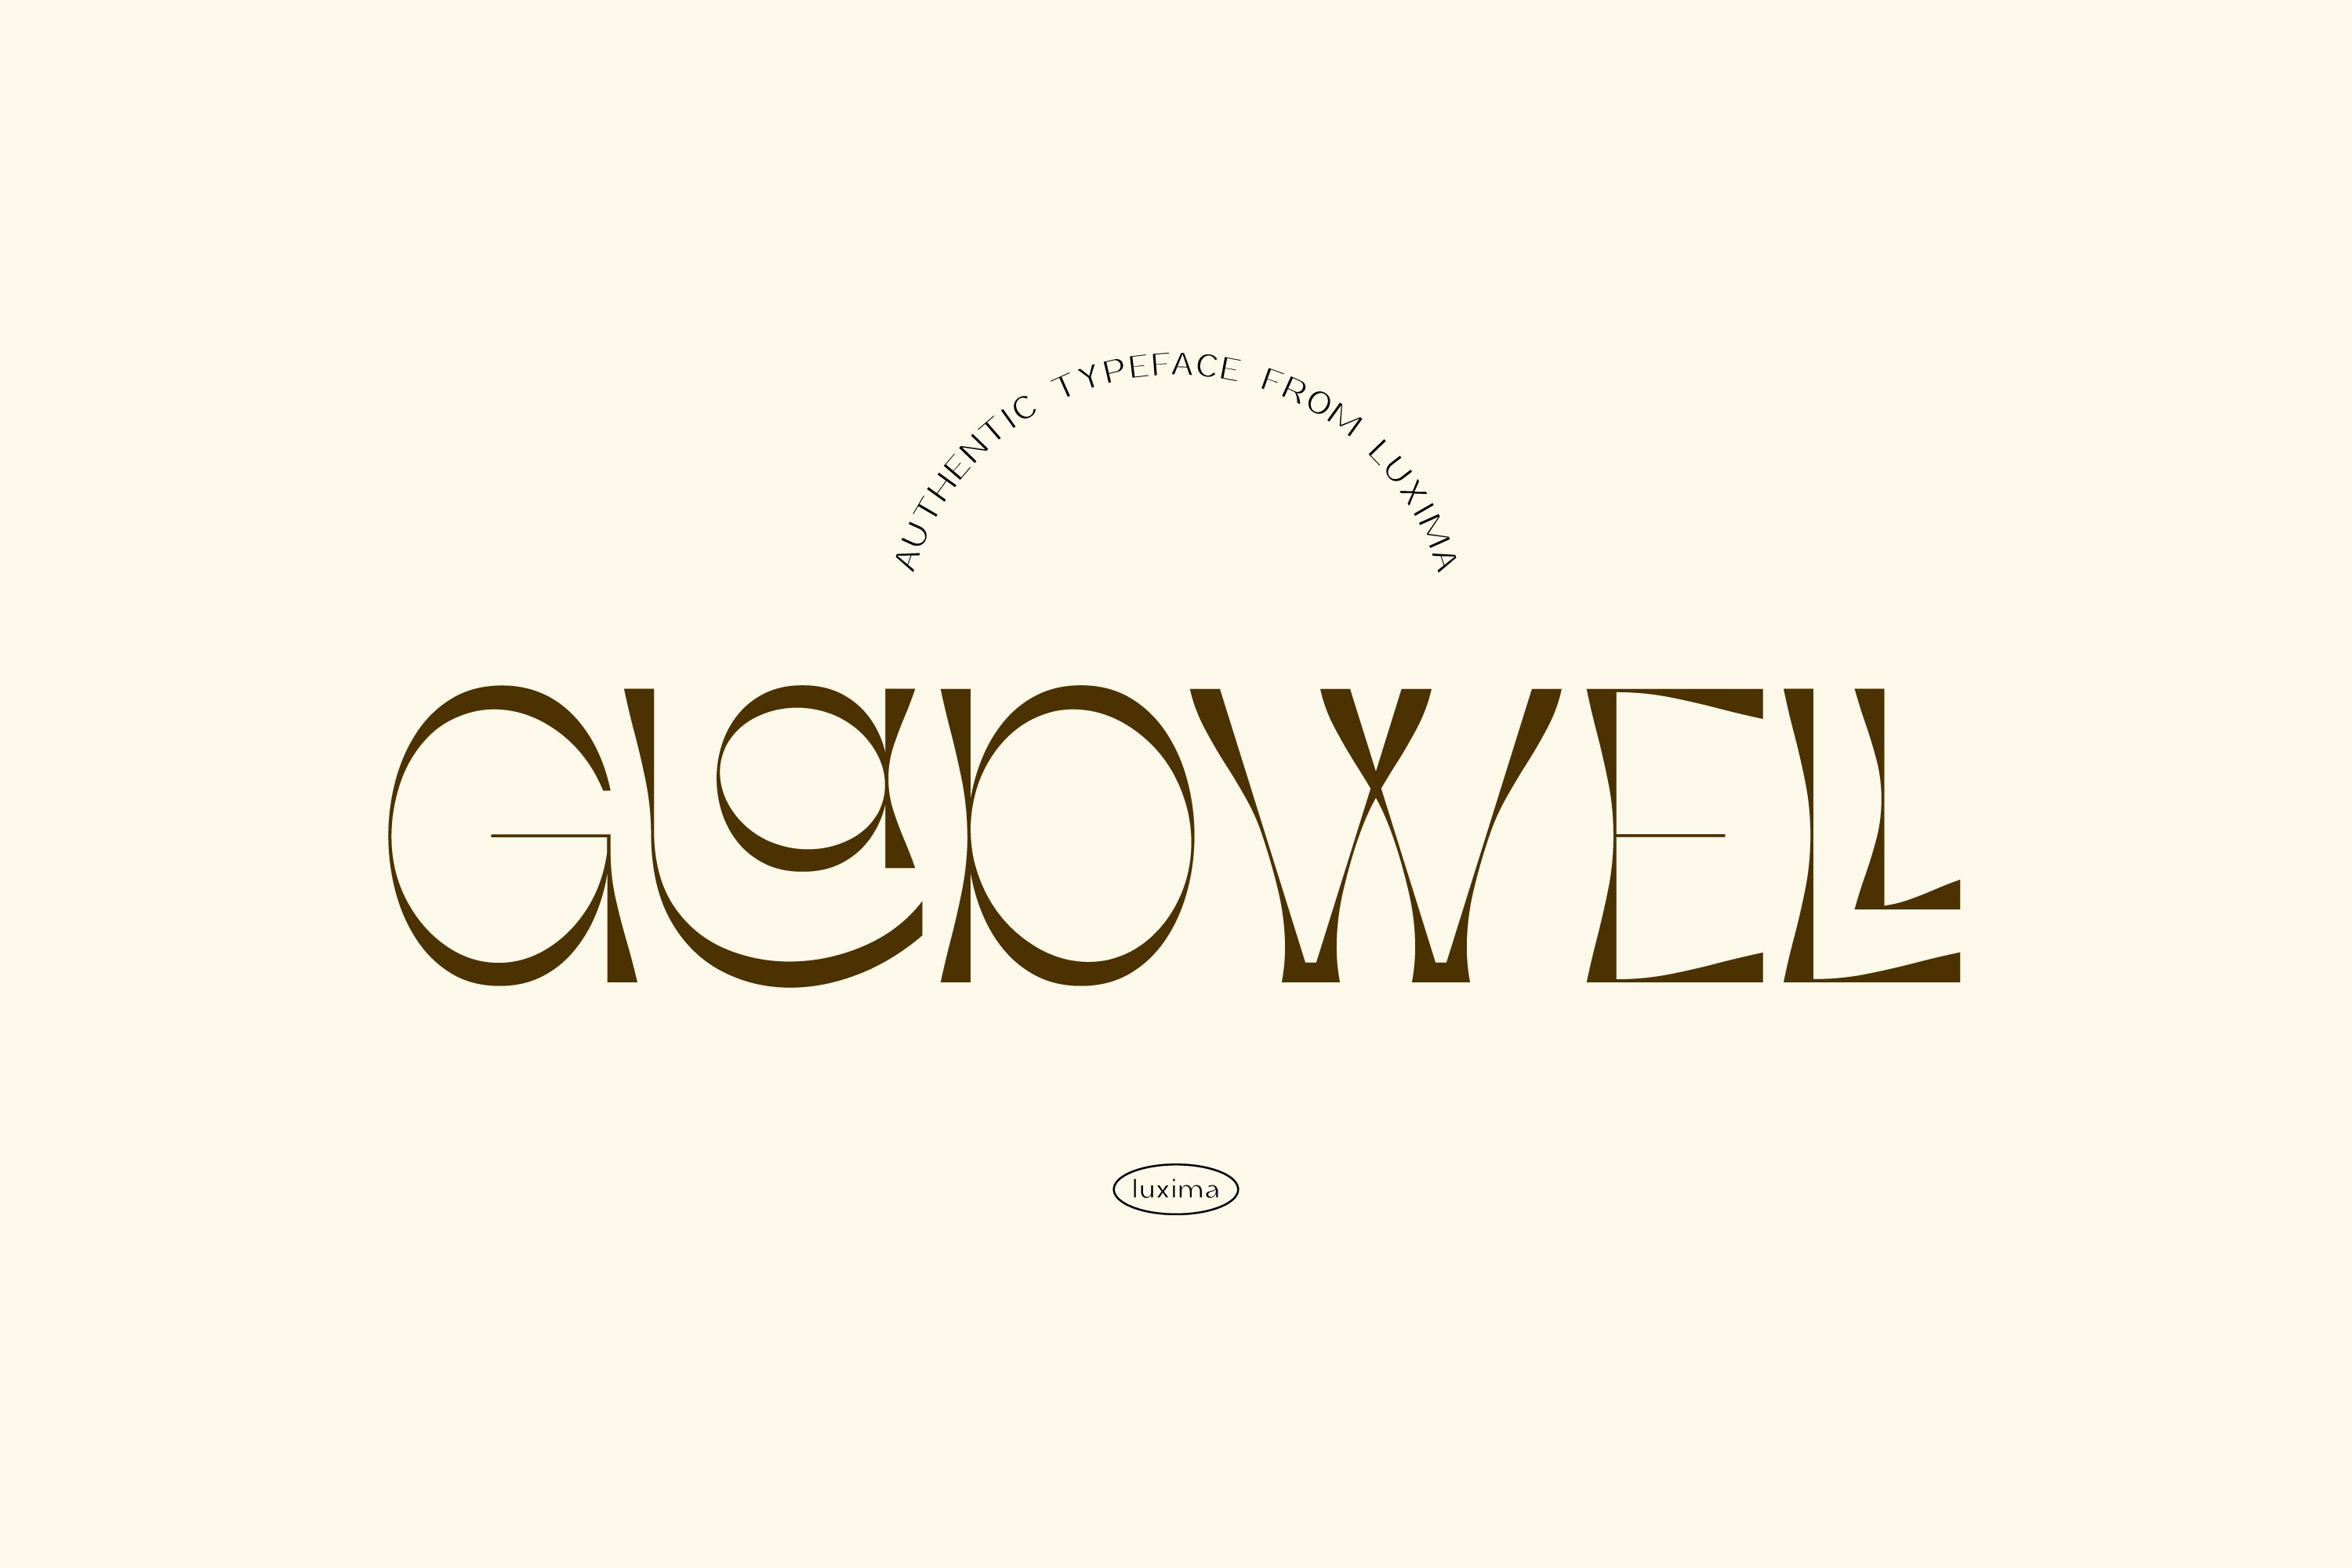 GLADWELL - Display Font cover image.